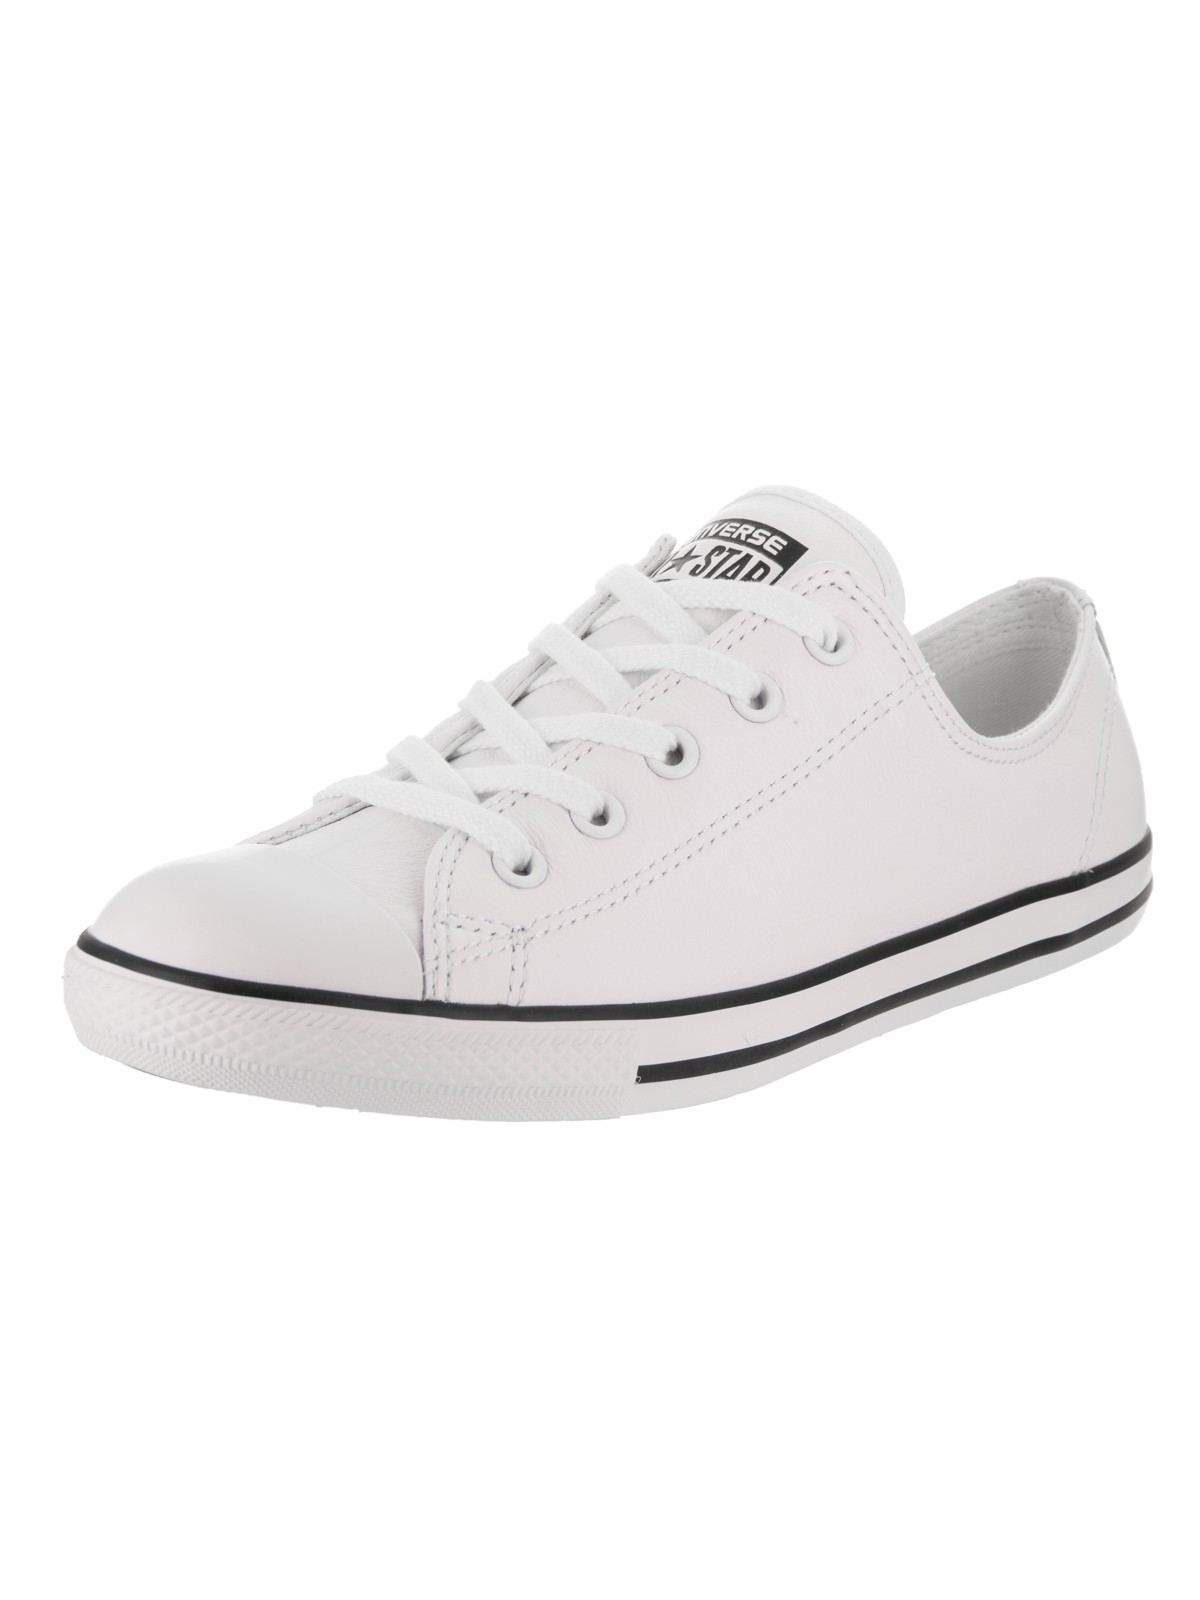 Converse Women's Chuck Taylor All Star Dainty Ox Casual Shoe - image 1 of 5